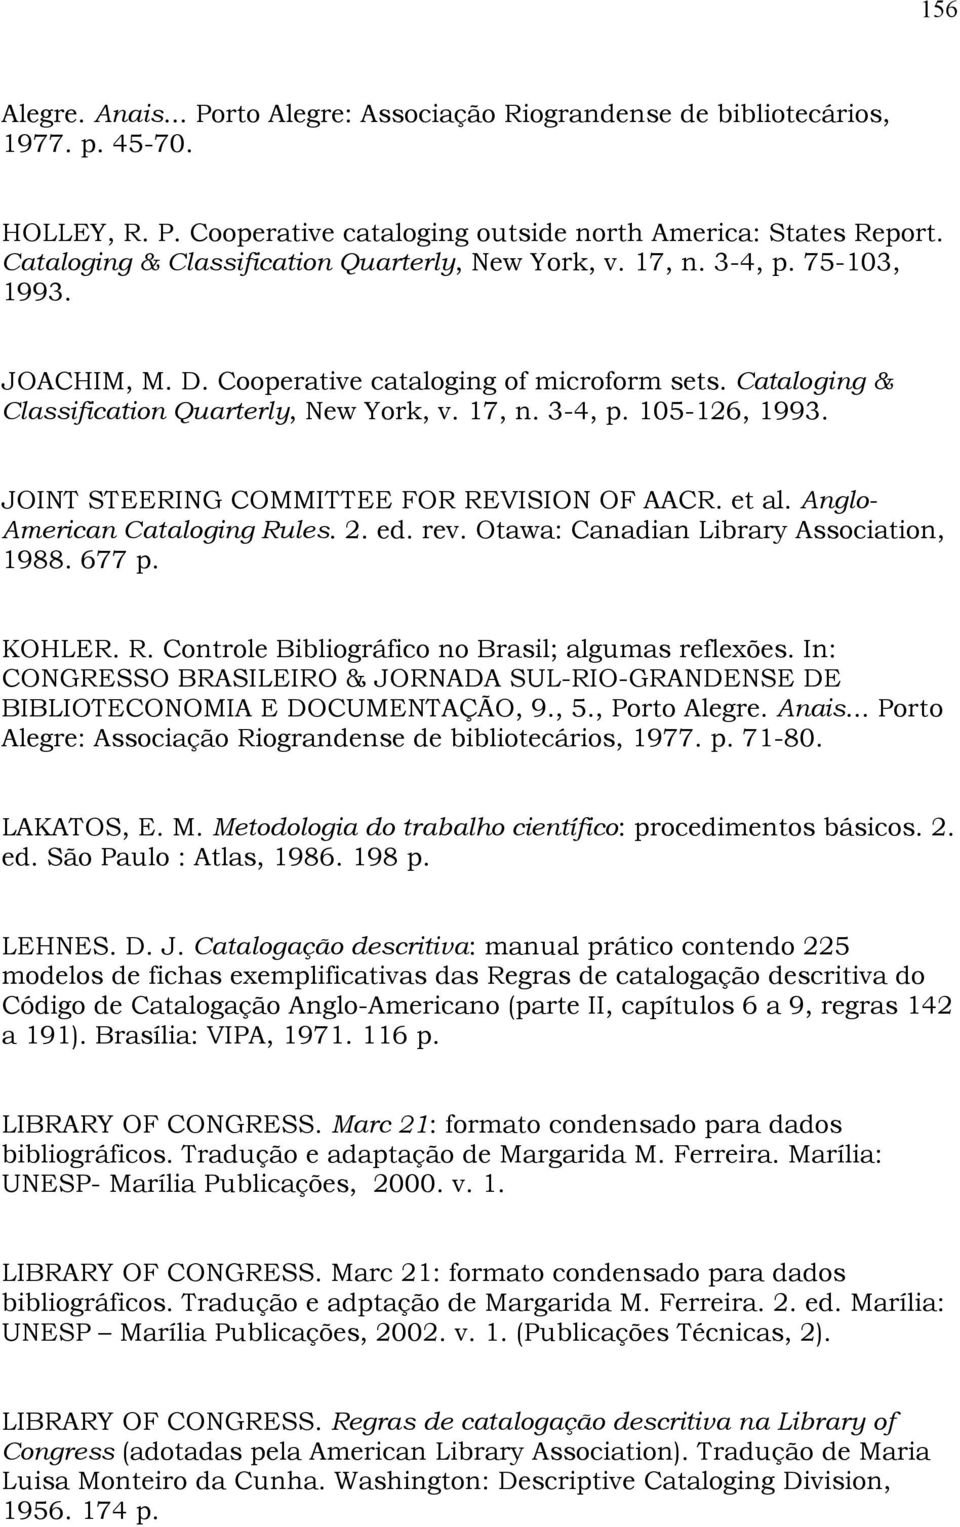 JOINT STEERING COMMITTEE FOR REVISION OF AACR. et al. Anglo- American Cataloging Rules. 2. ed. rev. Otawa: Canadian Library Association, 1988. 677 p. KOHLER. R. Controle Bibliográfico no Brasil; algumas reflexões.